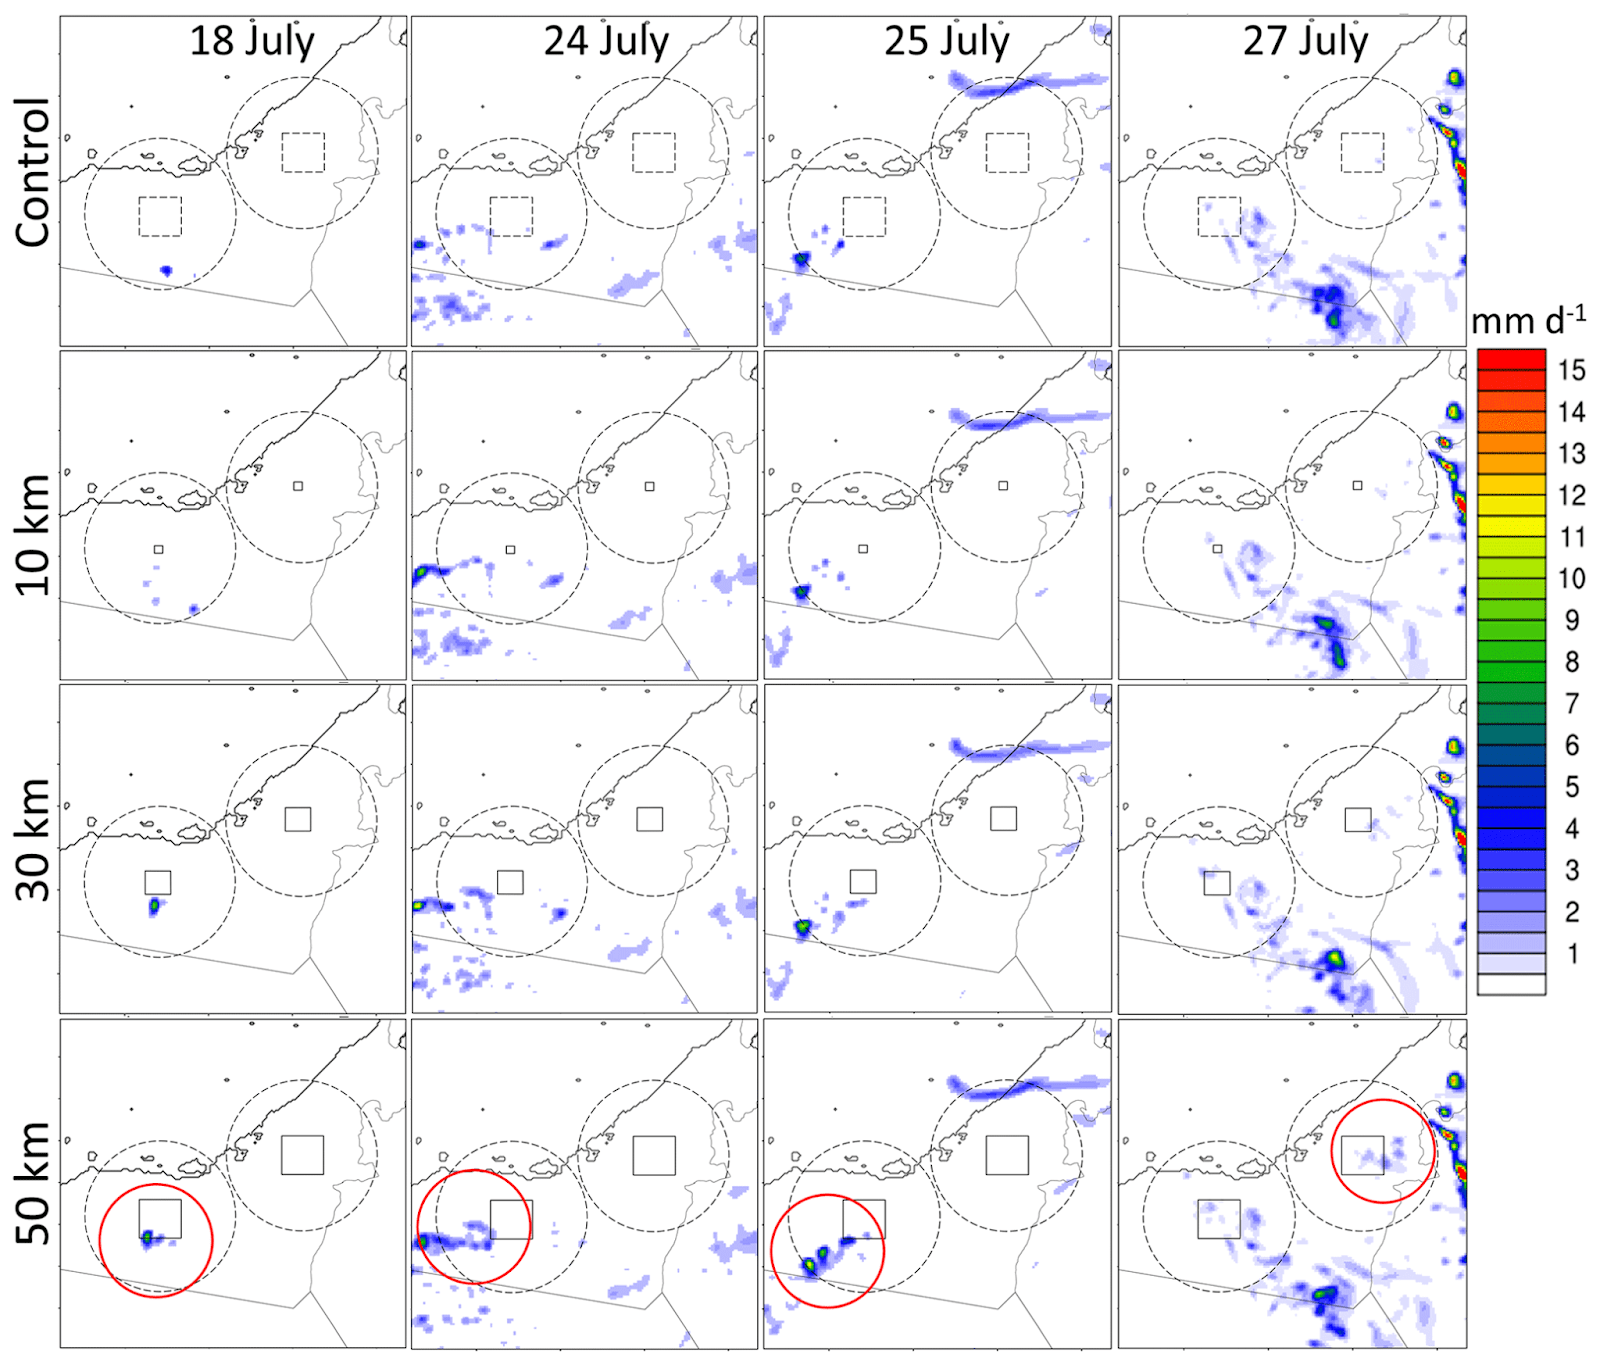 a chart showing the locations of the different-sized ABSs and the precipitation nearby